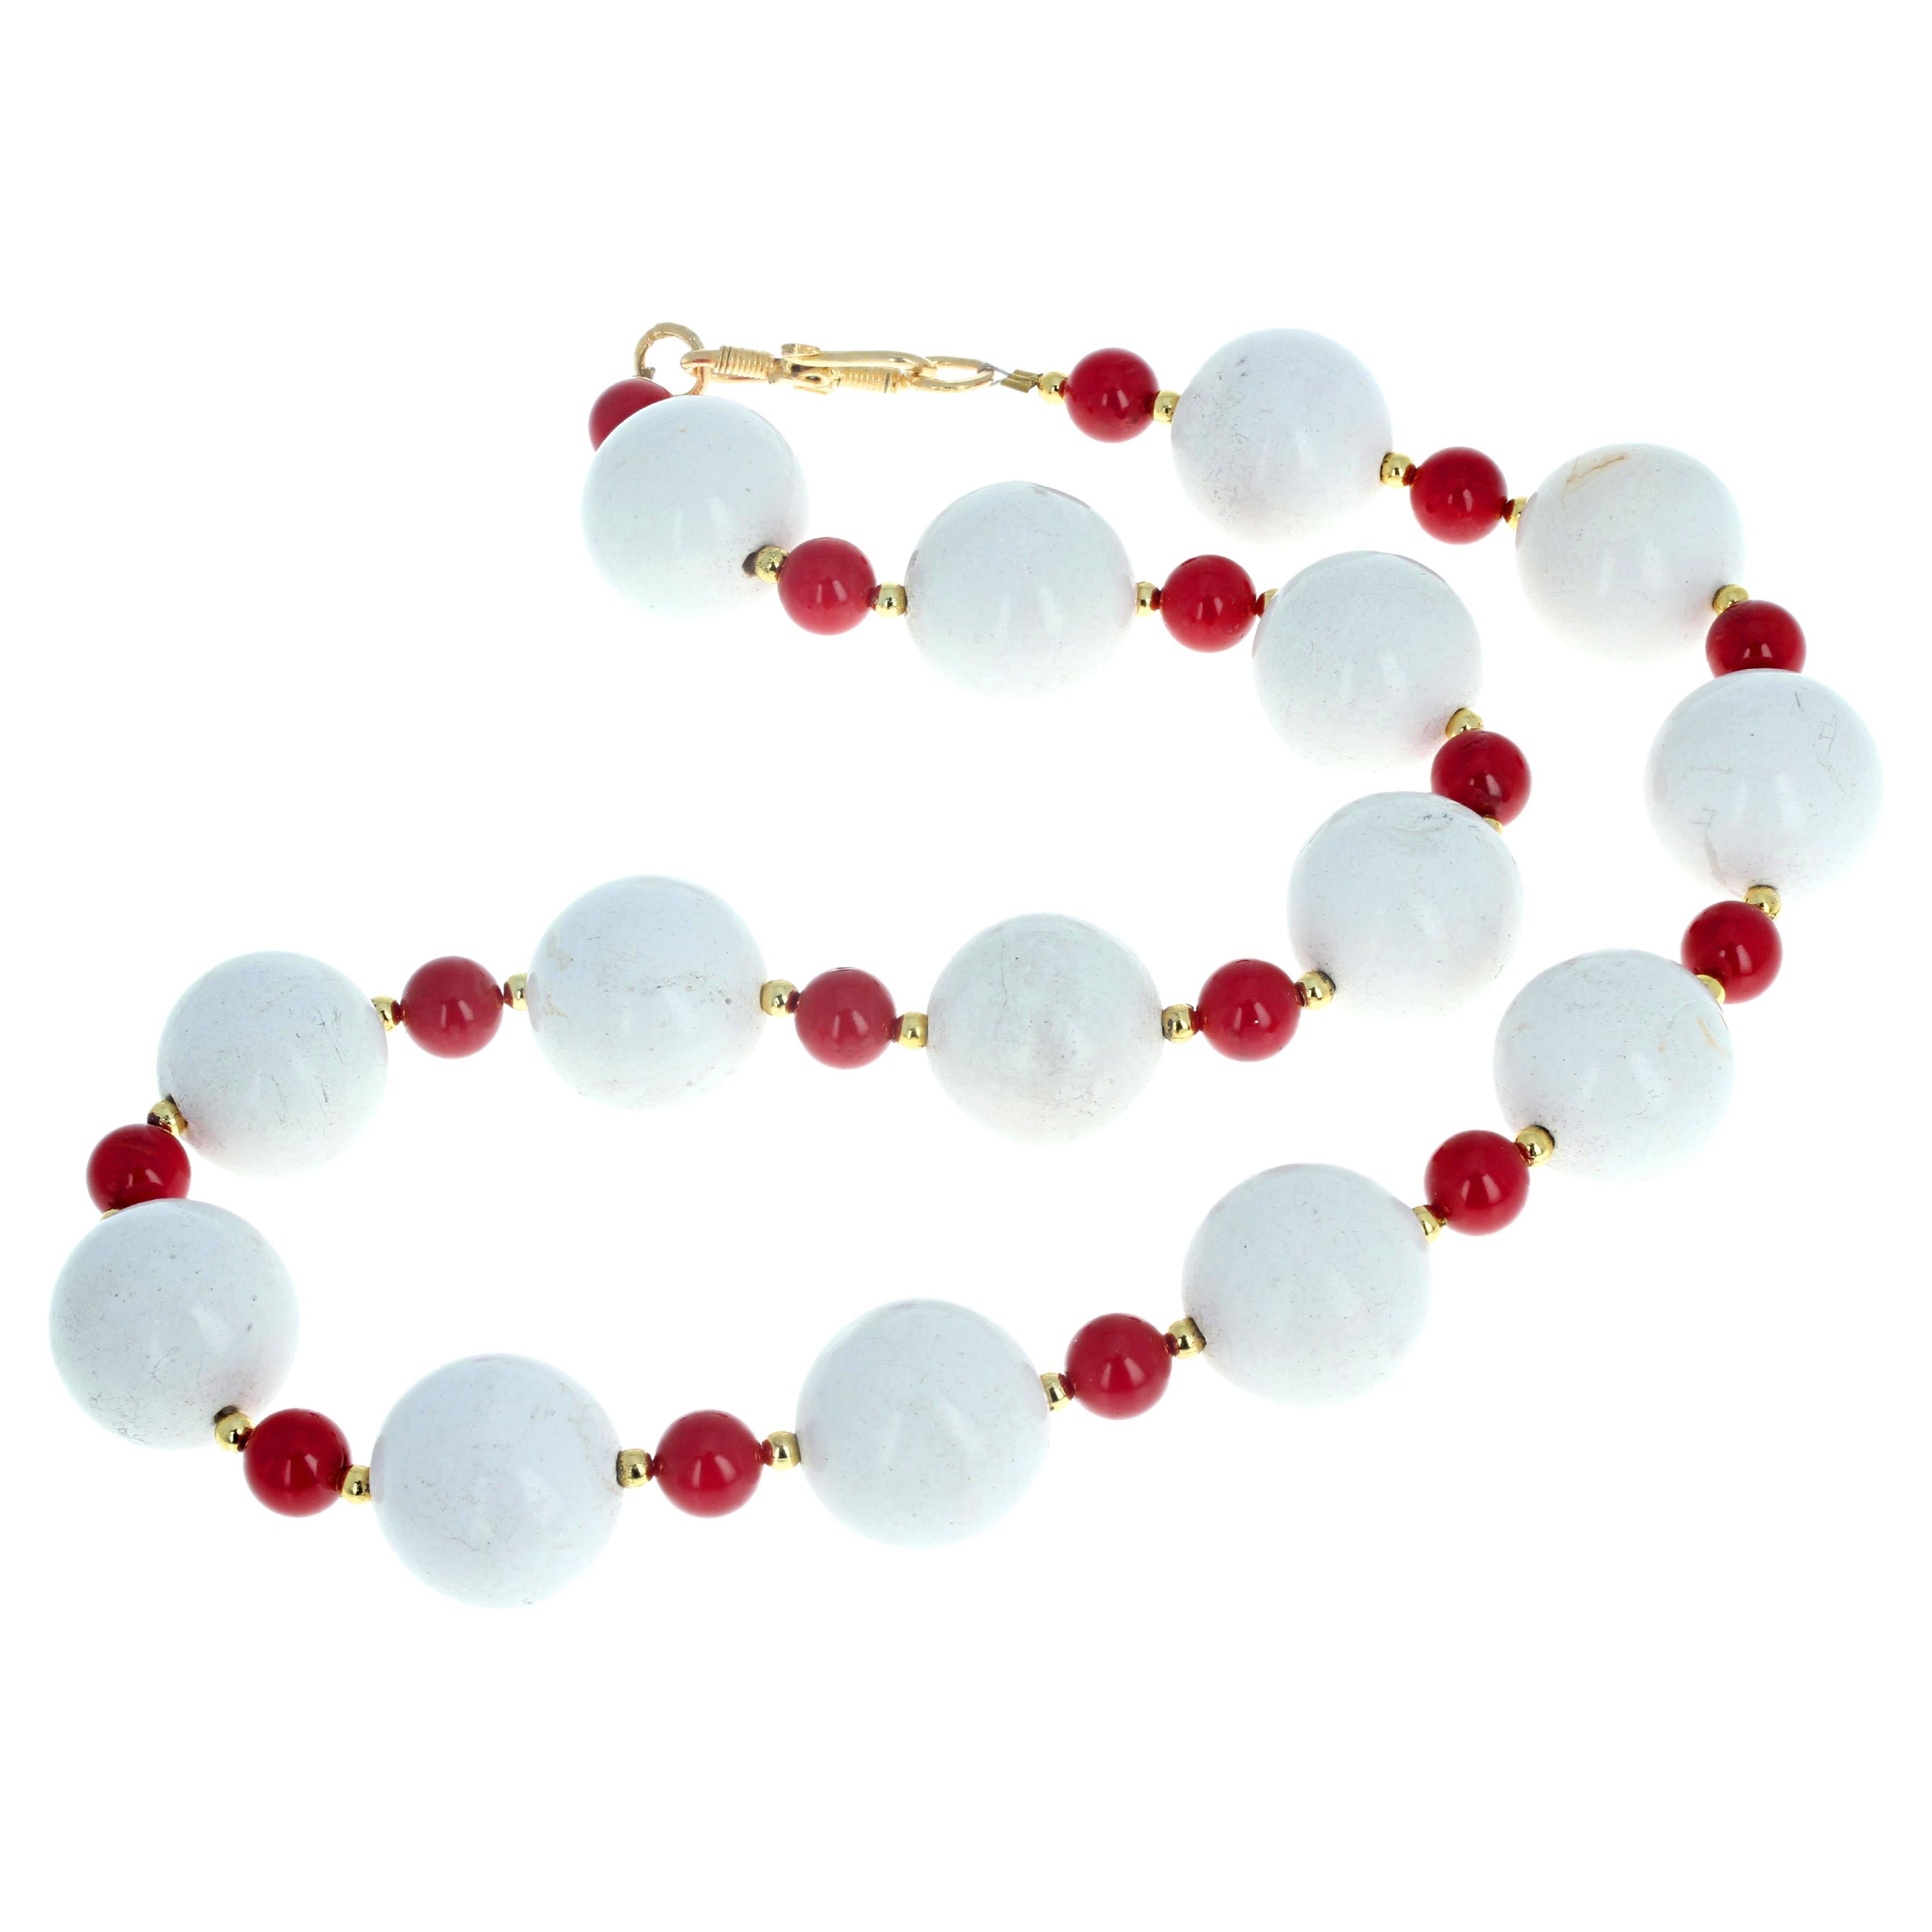 Lovely statement necklace of white real 